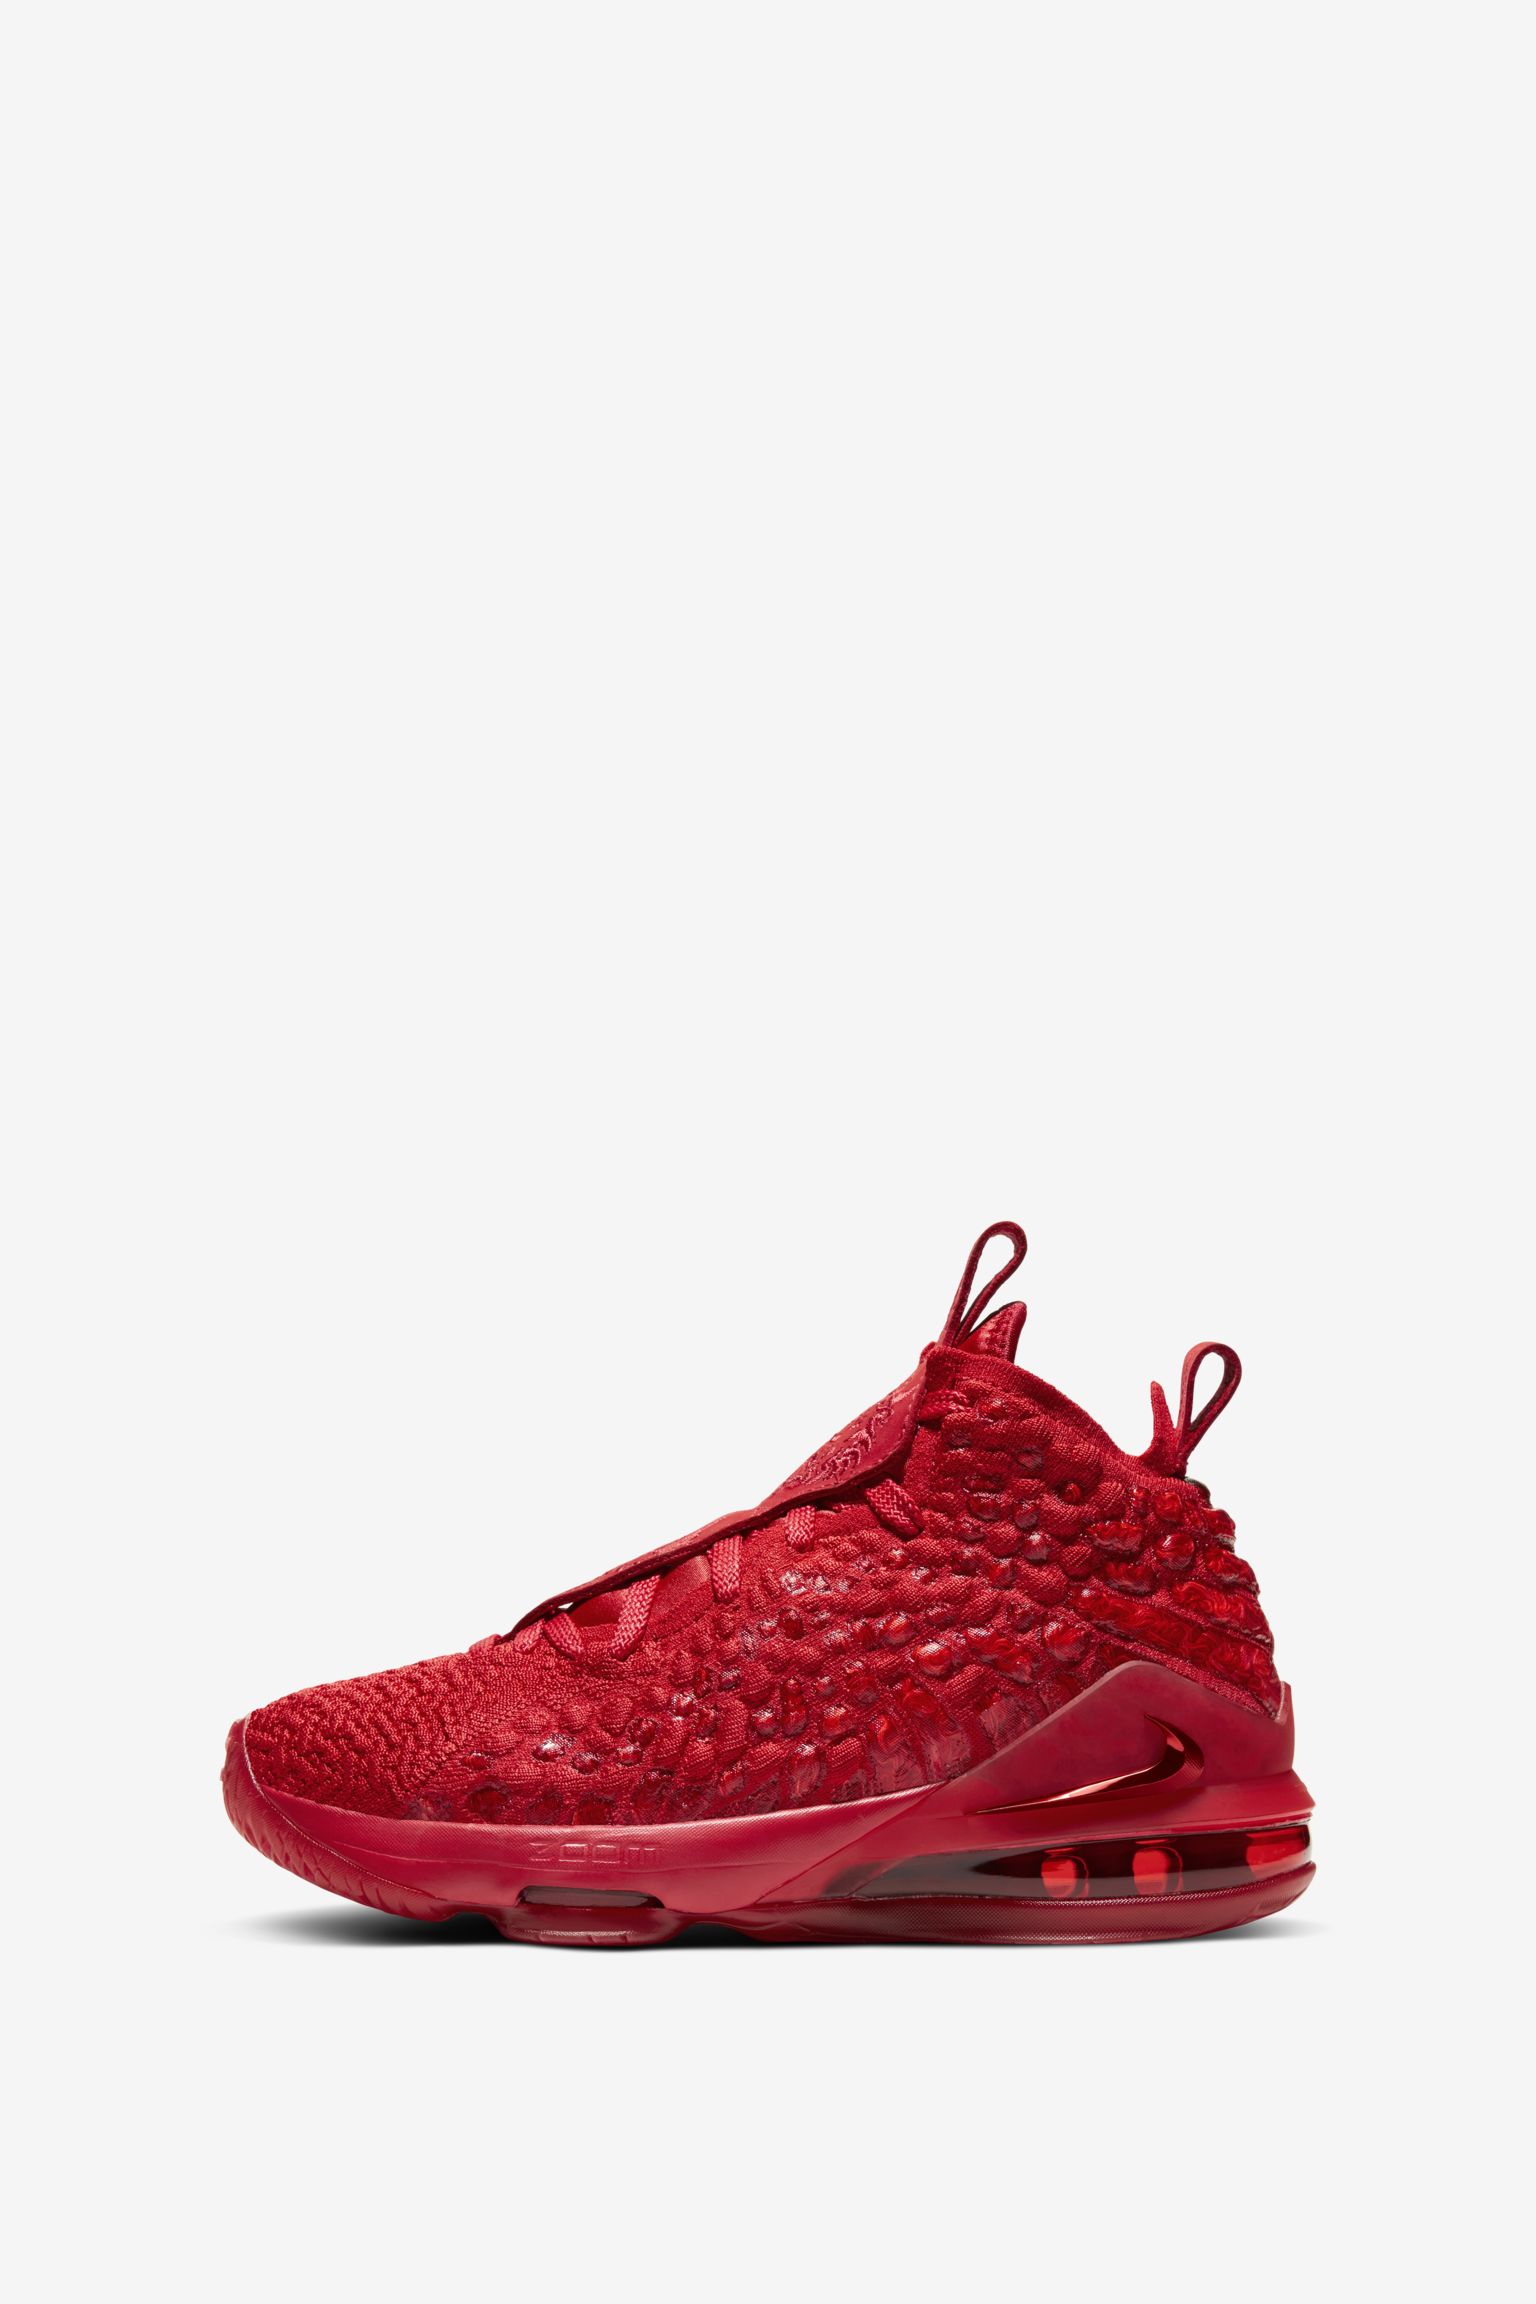 LeBron 17 'Red Carpet' Release Date. Nike SNKRS